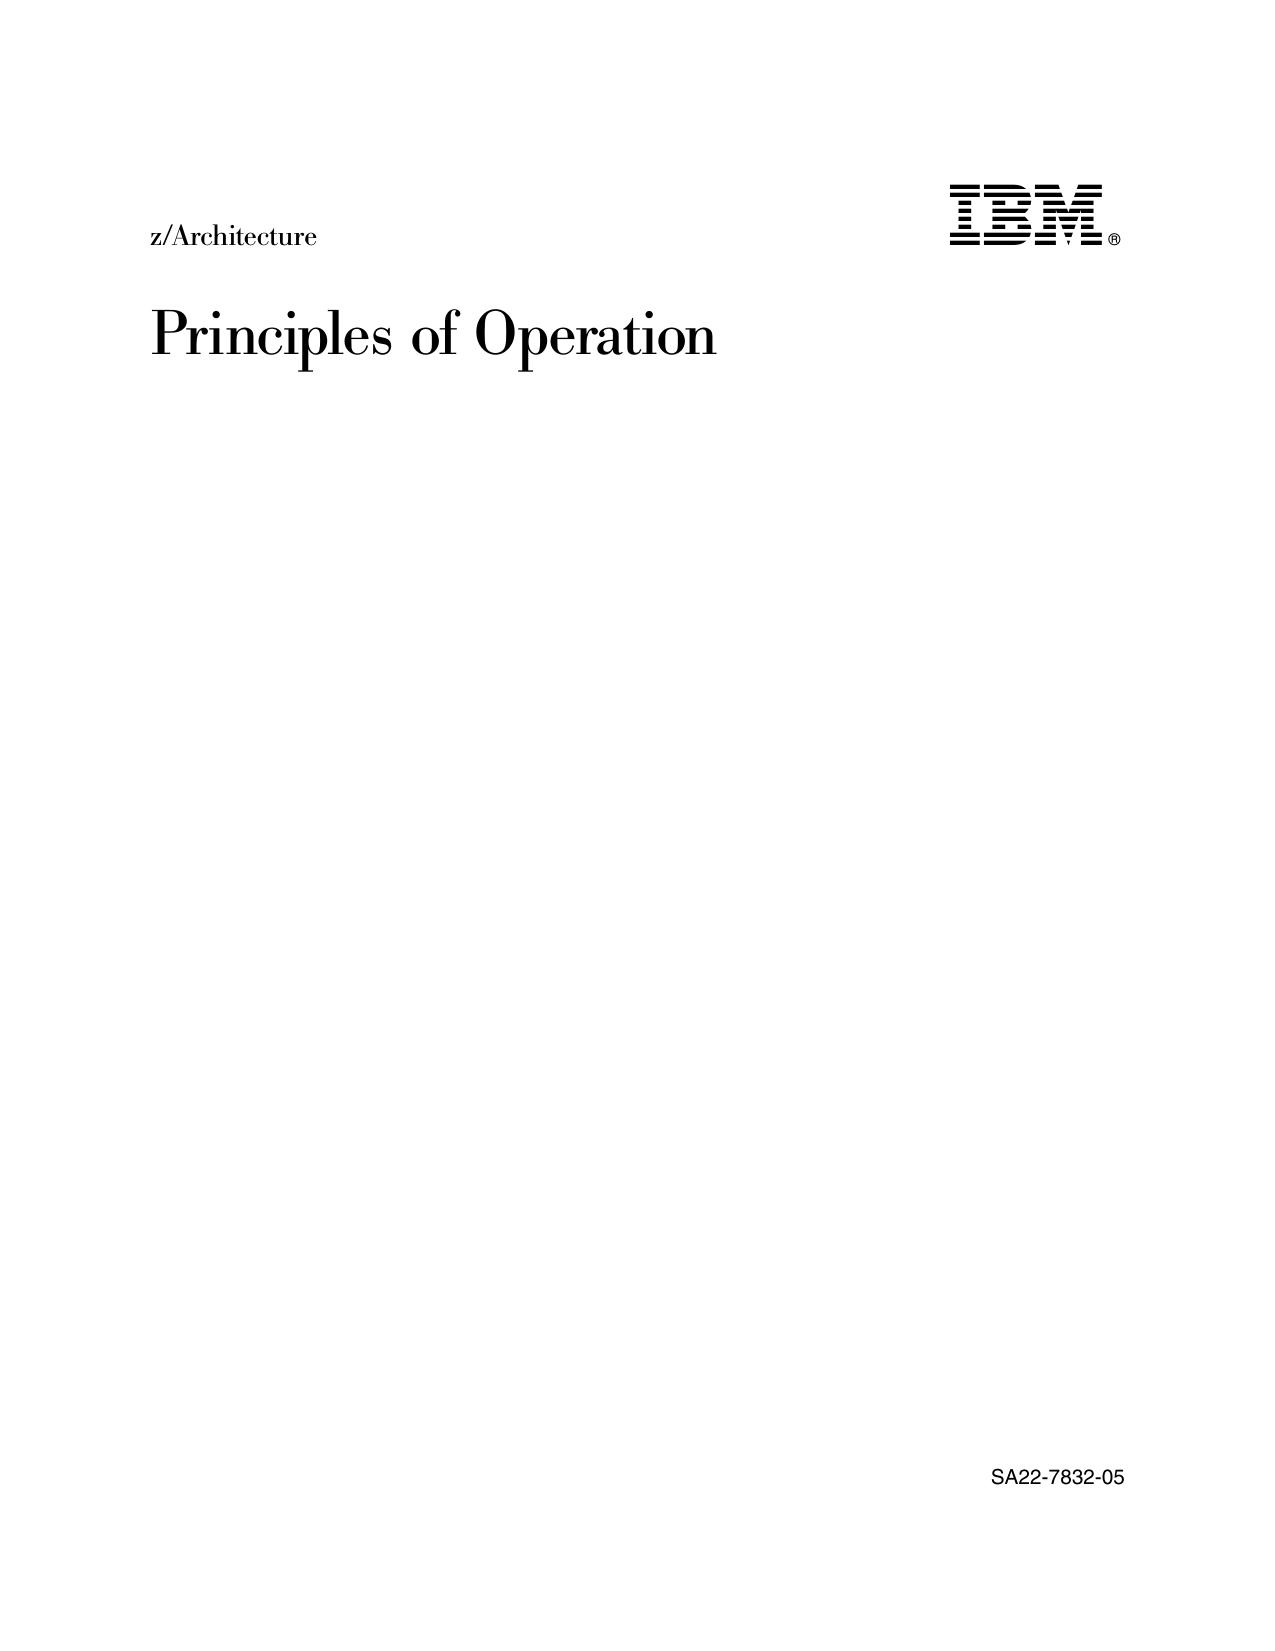 IBM zArchitecture Principles of Operation by IBM Corporation